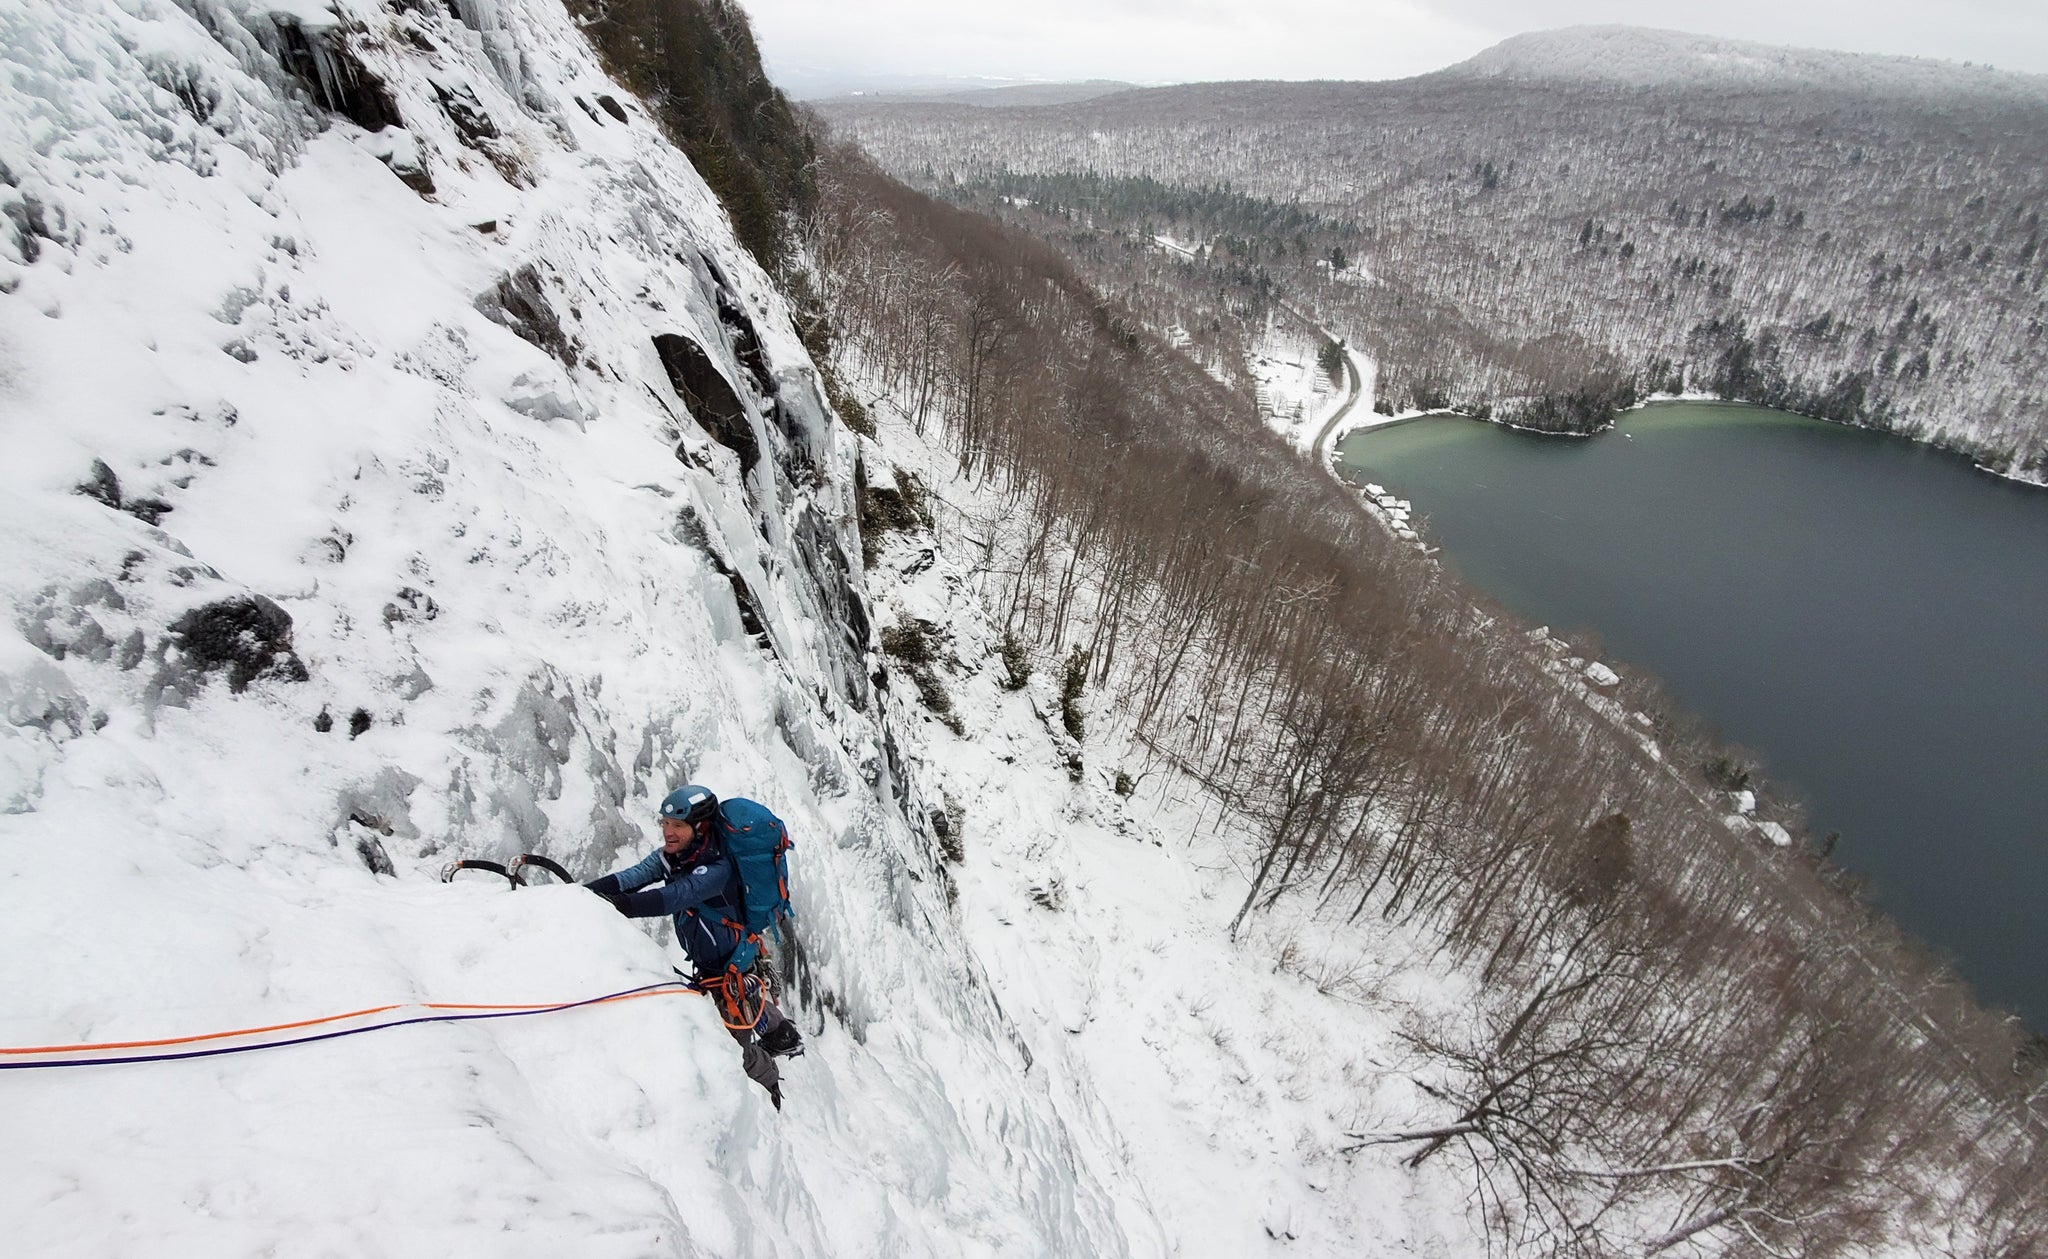 Adventure Spirit Guide Kel Rossiter follows a pitch of ice climbing at Lake Willoughby in Vermont